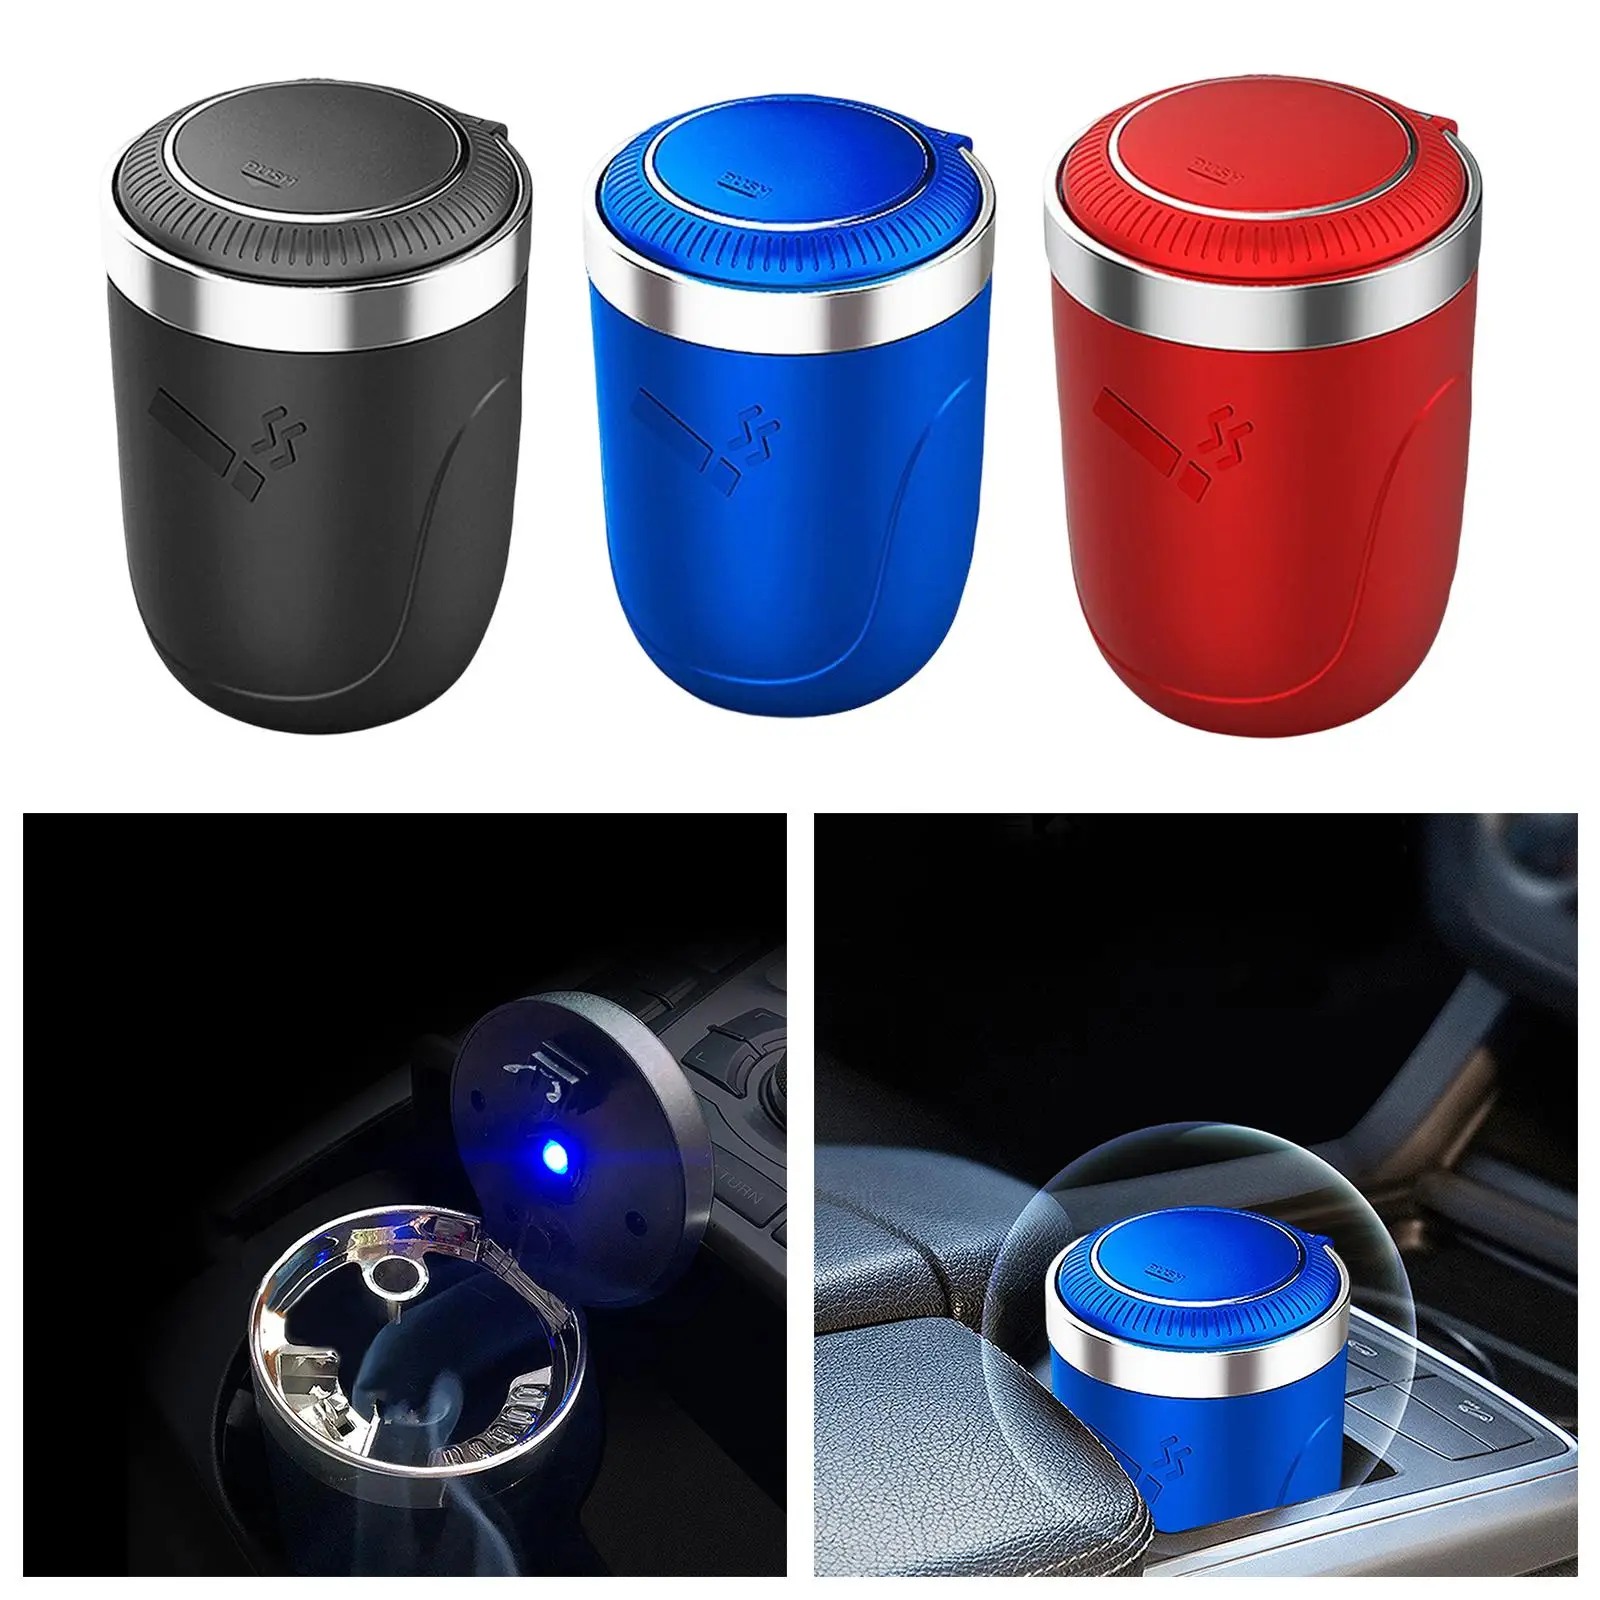 Car Ashtray with Lid Easy Clean up Detachable Smokeless Mini Ashtray Container Cigar Ash Bucket Ash Tray Fits for Office Travel